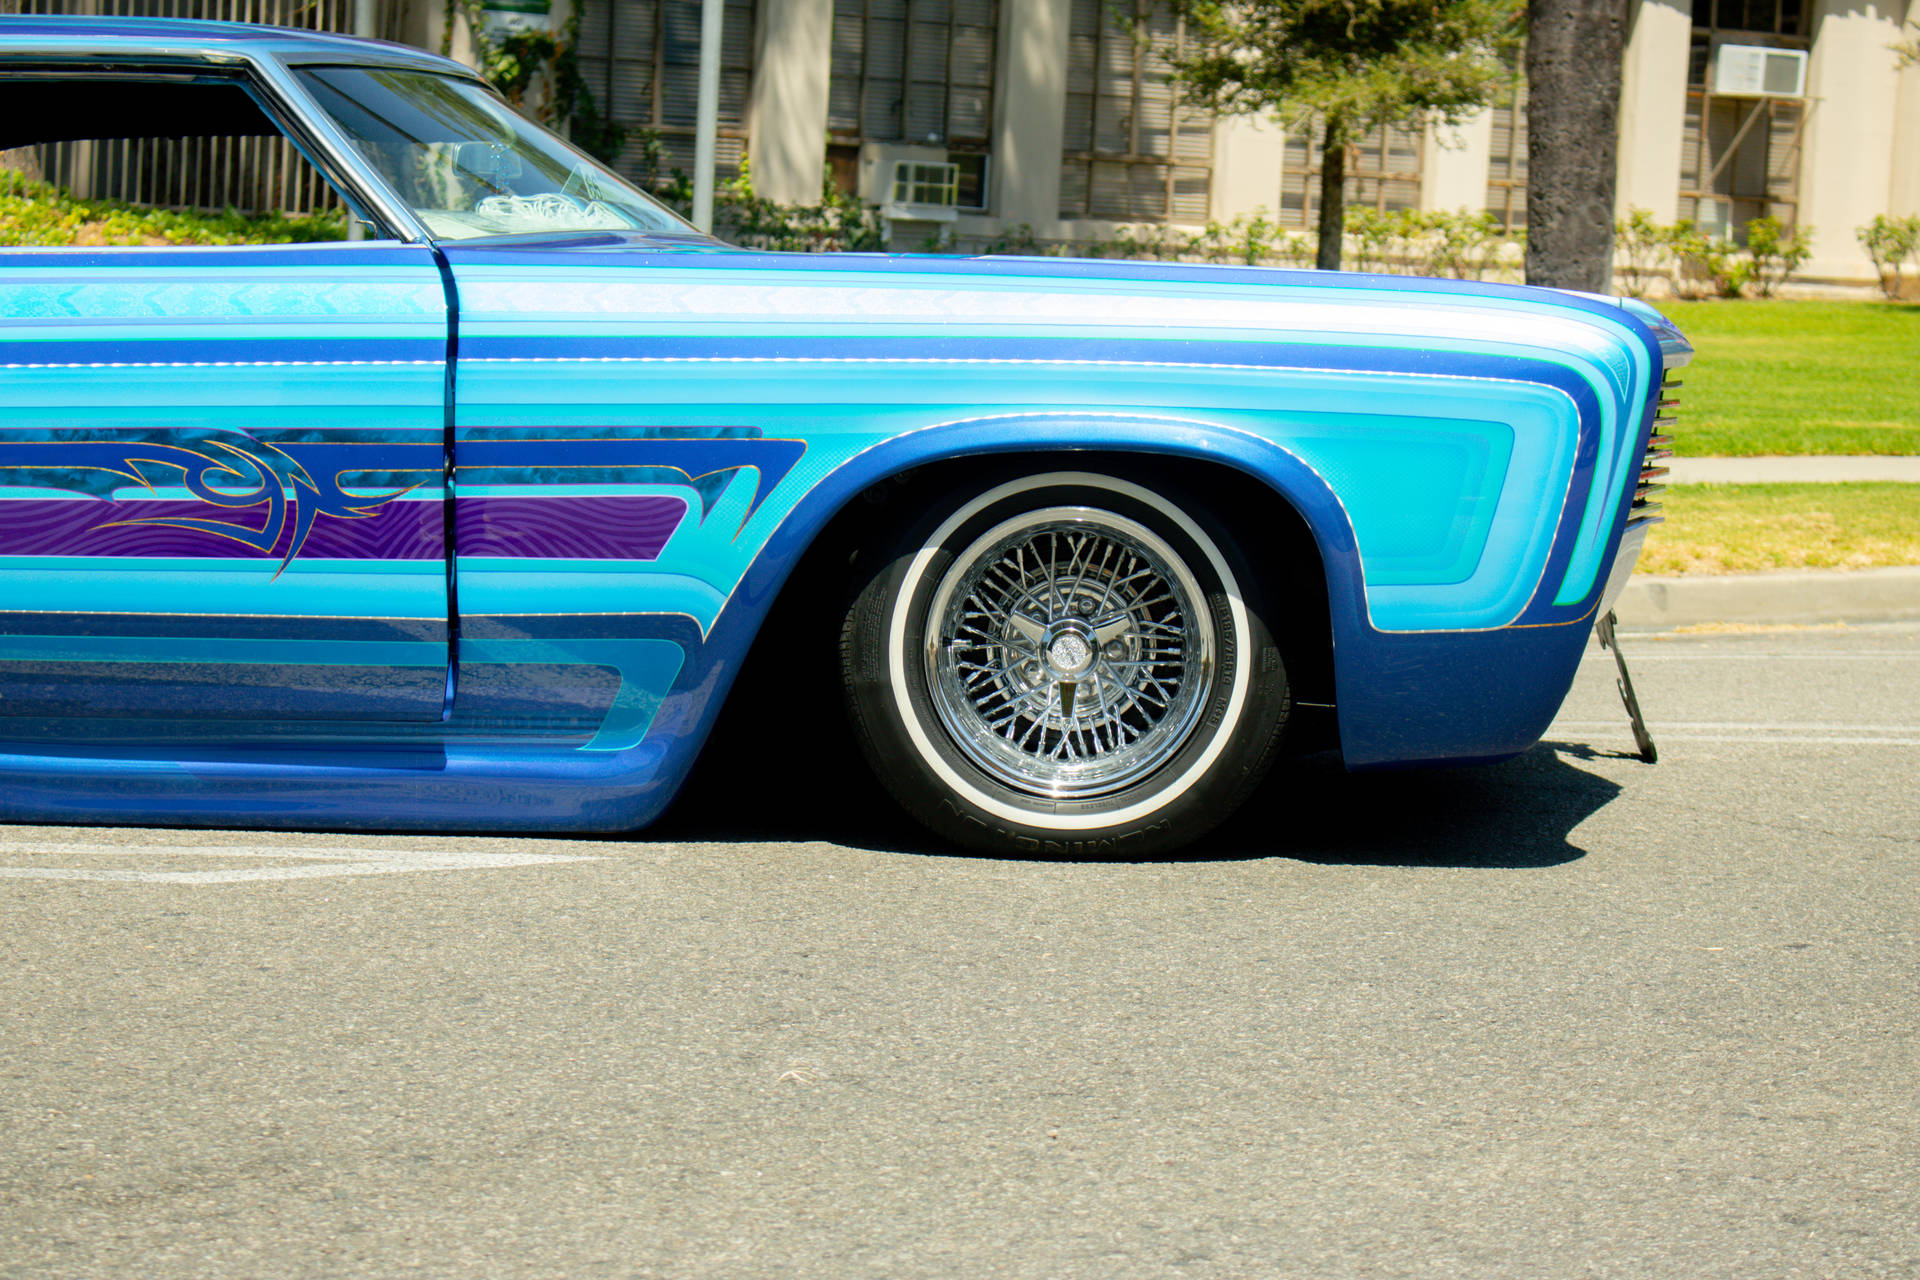 Lowrider Impala With Blue Violet Decals